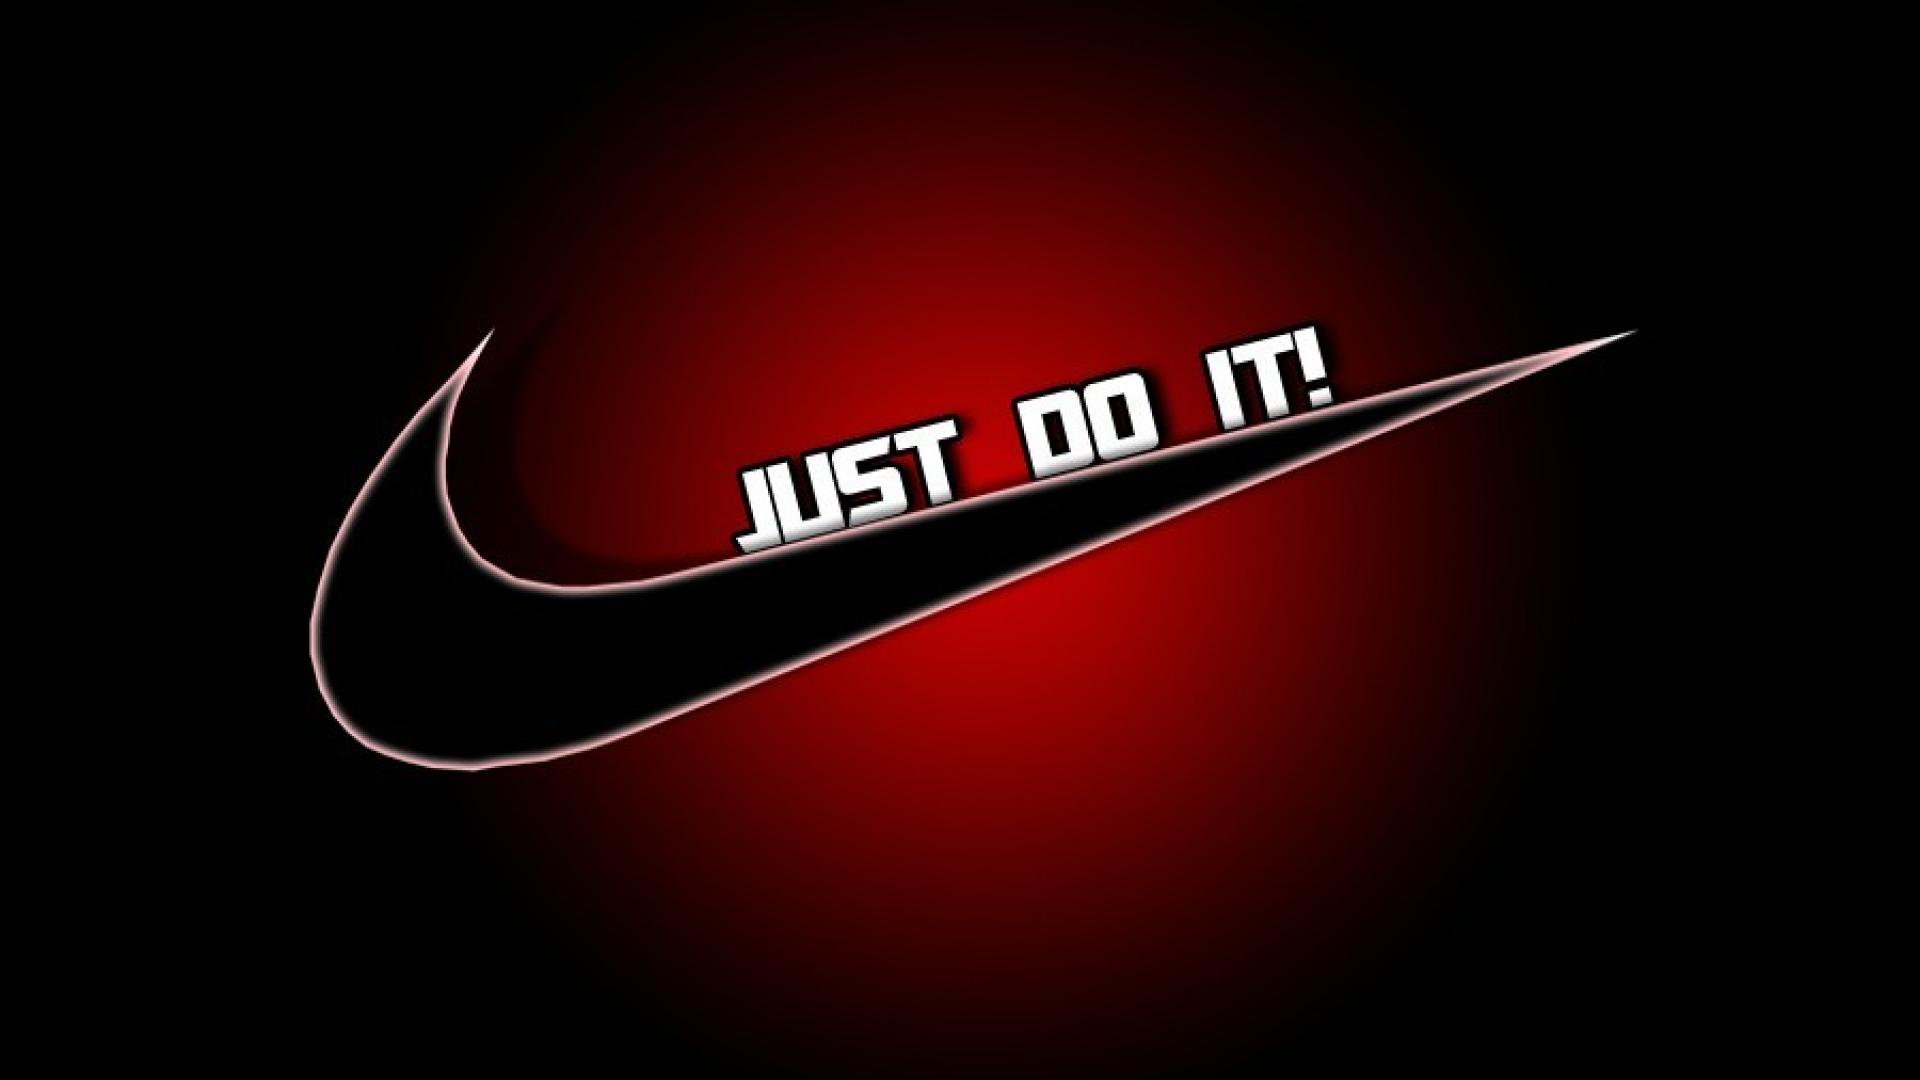 Black red check nike just do it wallpaper | (105300)